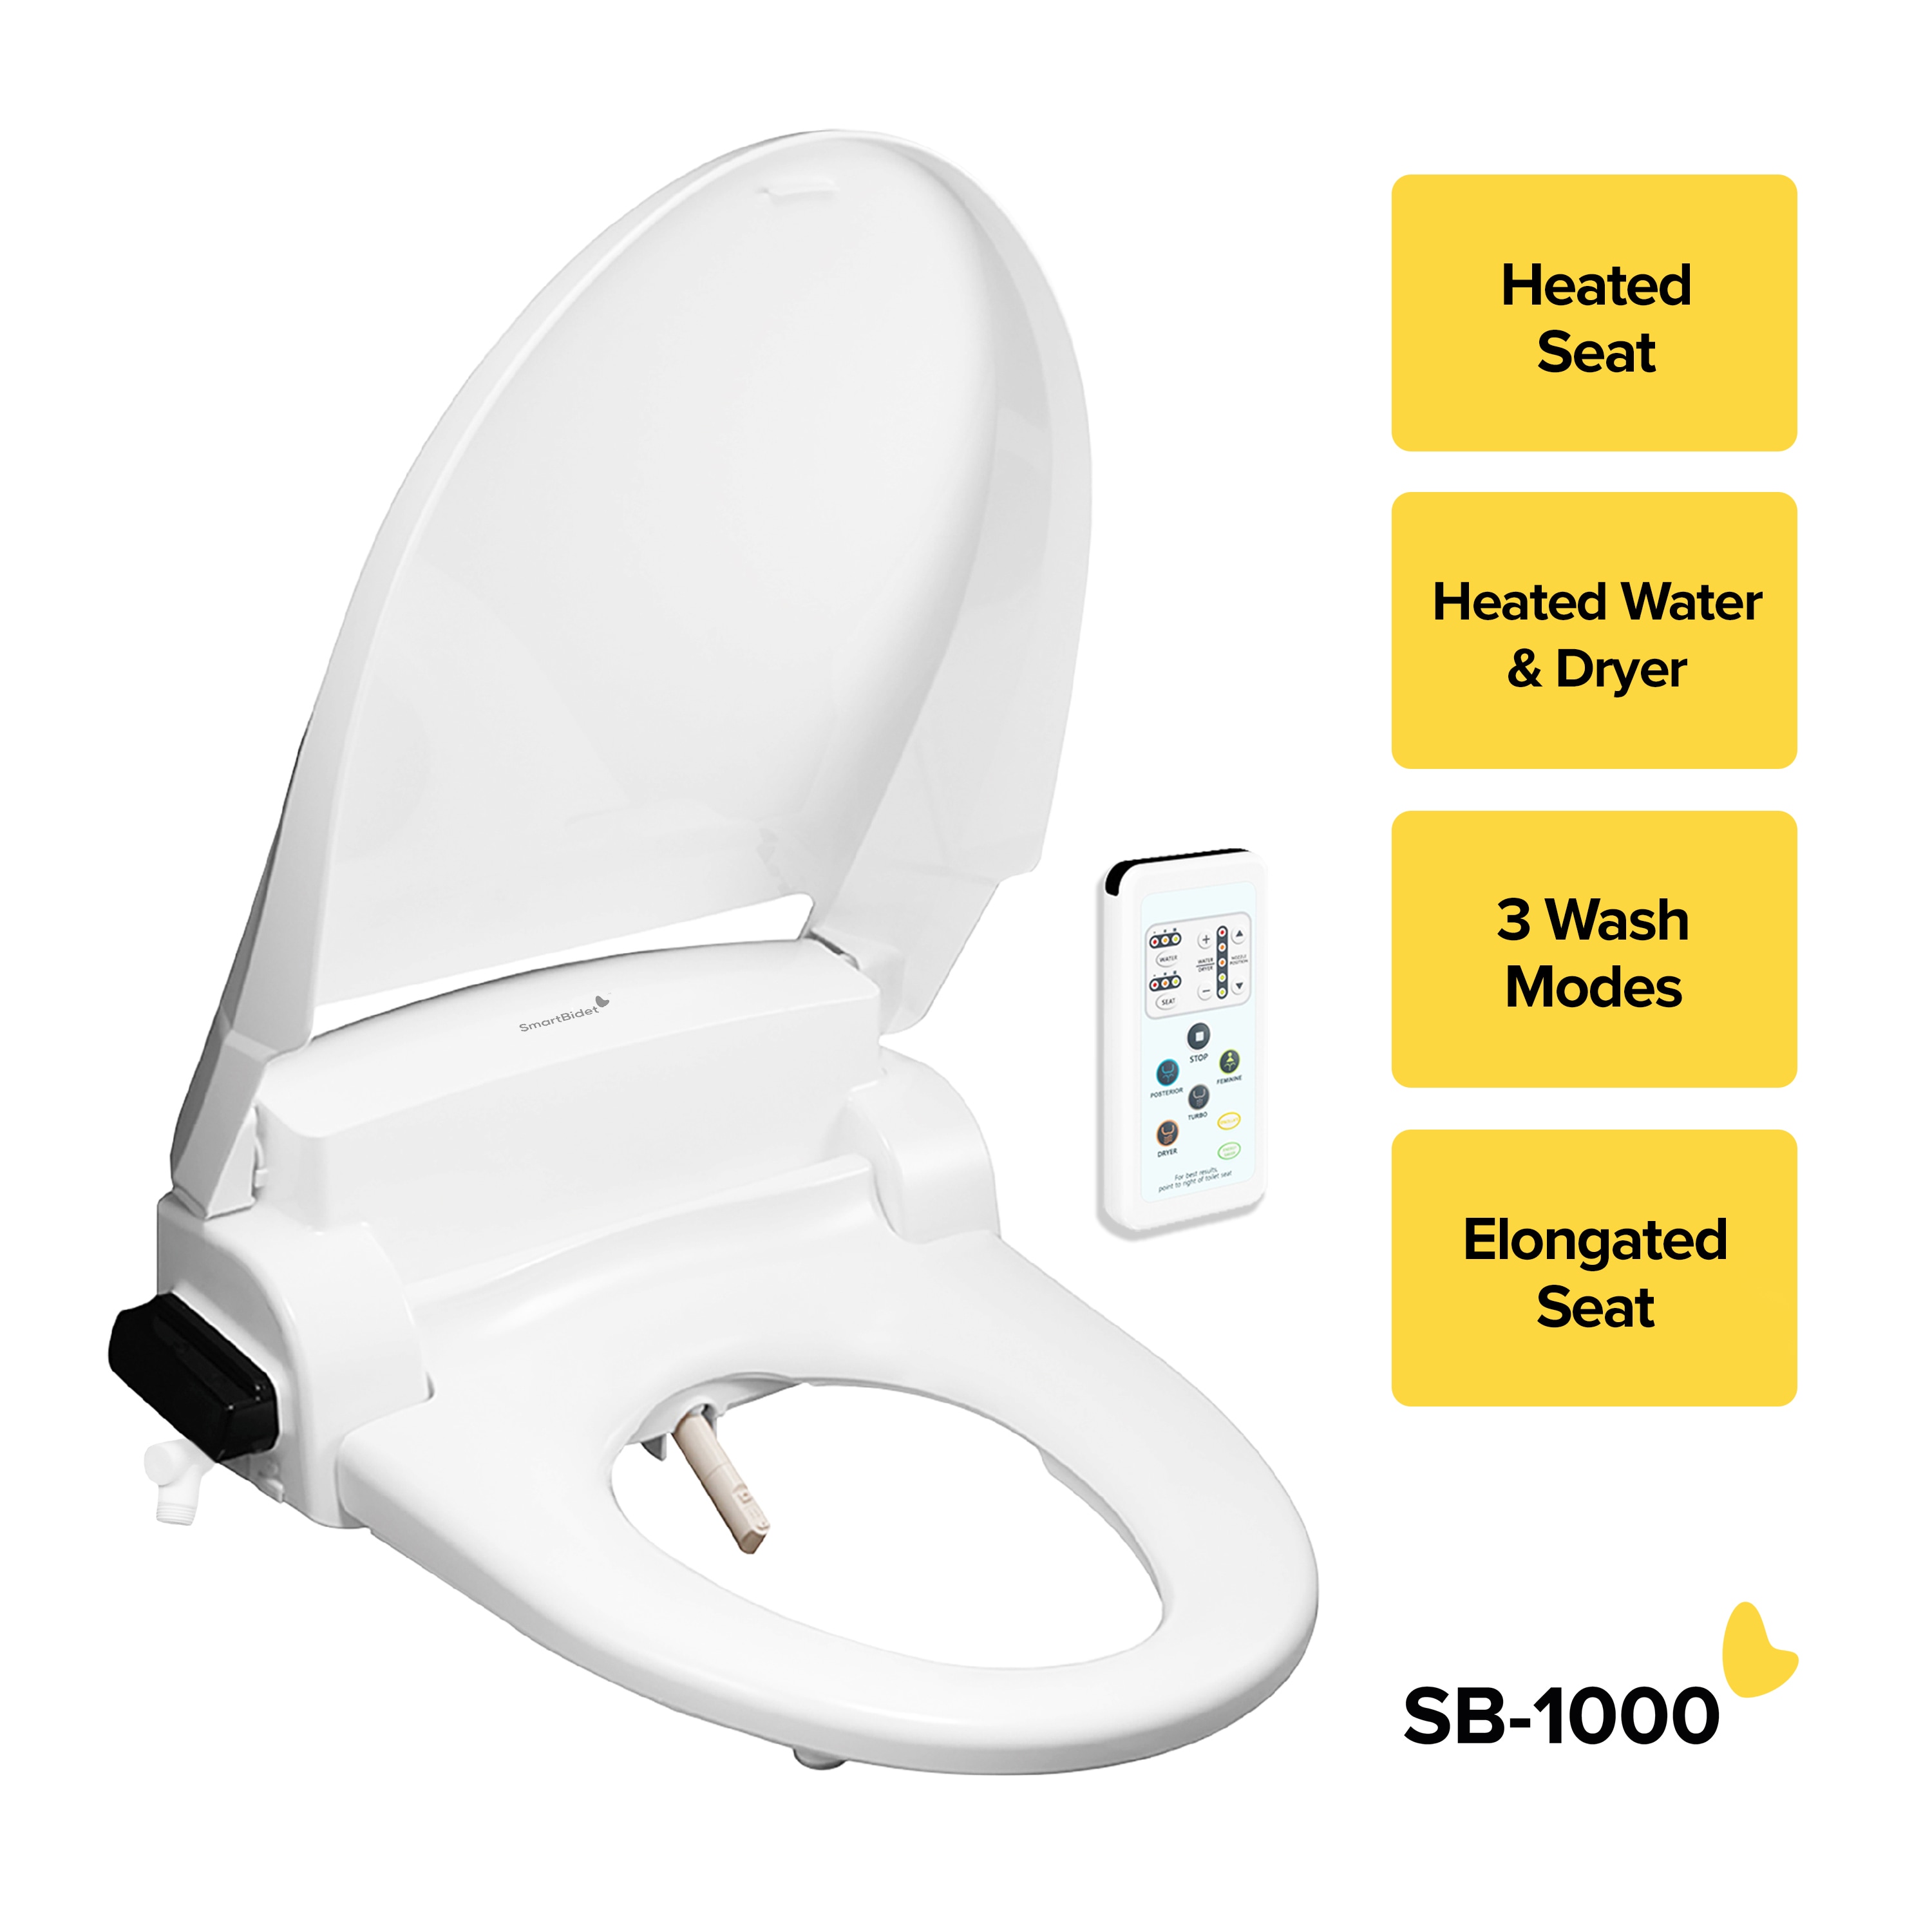 4 Pieces Toilet Seat Cover Toilet Seat Warmer Potty Training Toilet Seat for Kid 